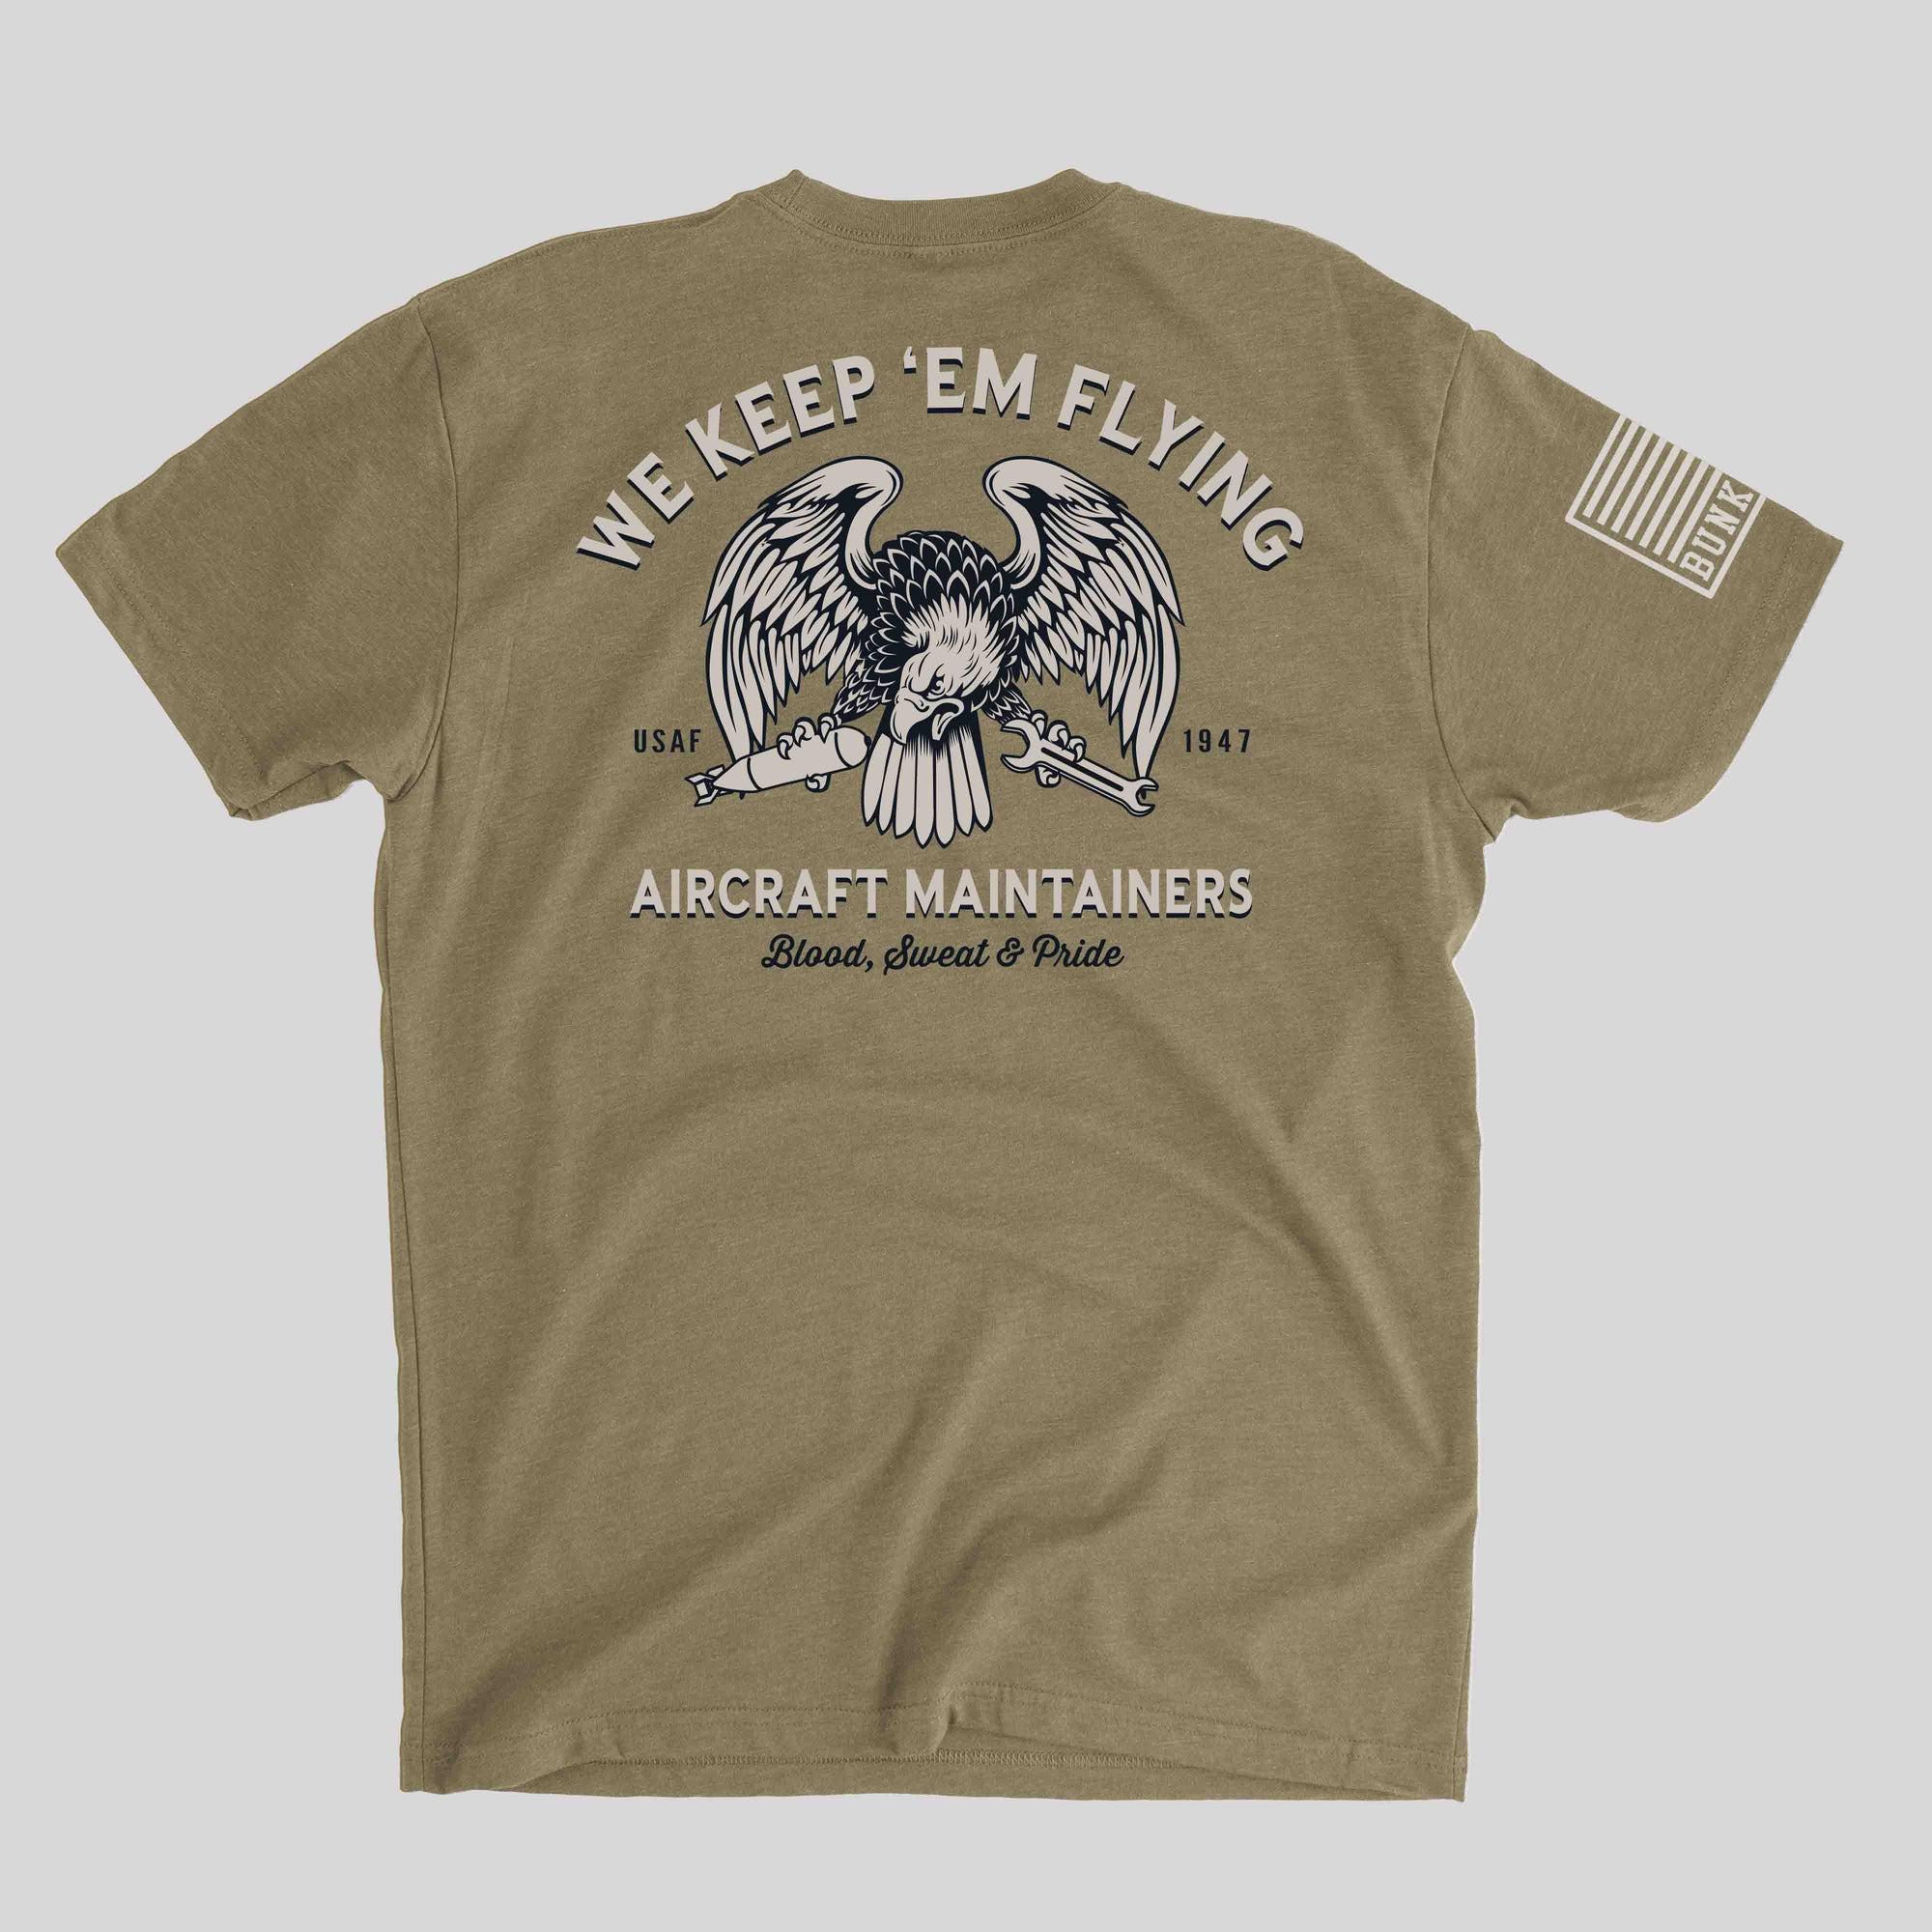 Aircraft Maintainer AFSC 2A3, Bunker 27, US air force t-shirts, hoodies, hats, military squadron shirts, unit, USAF veteran owned